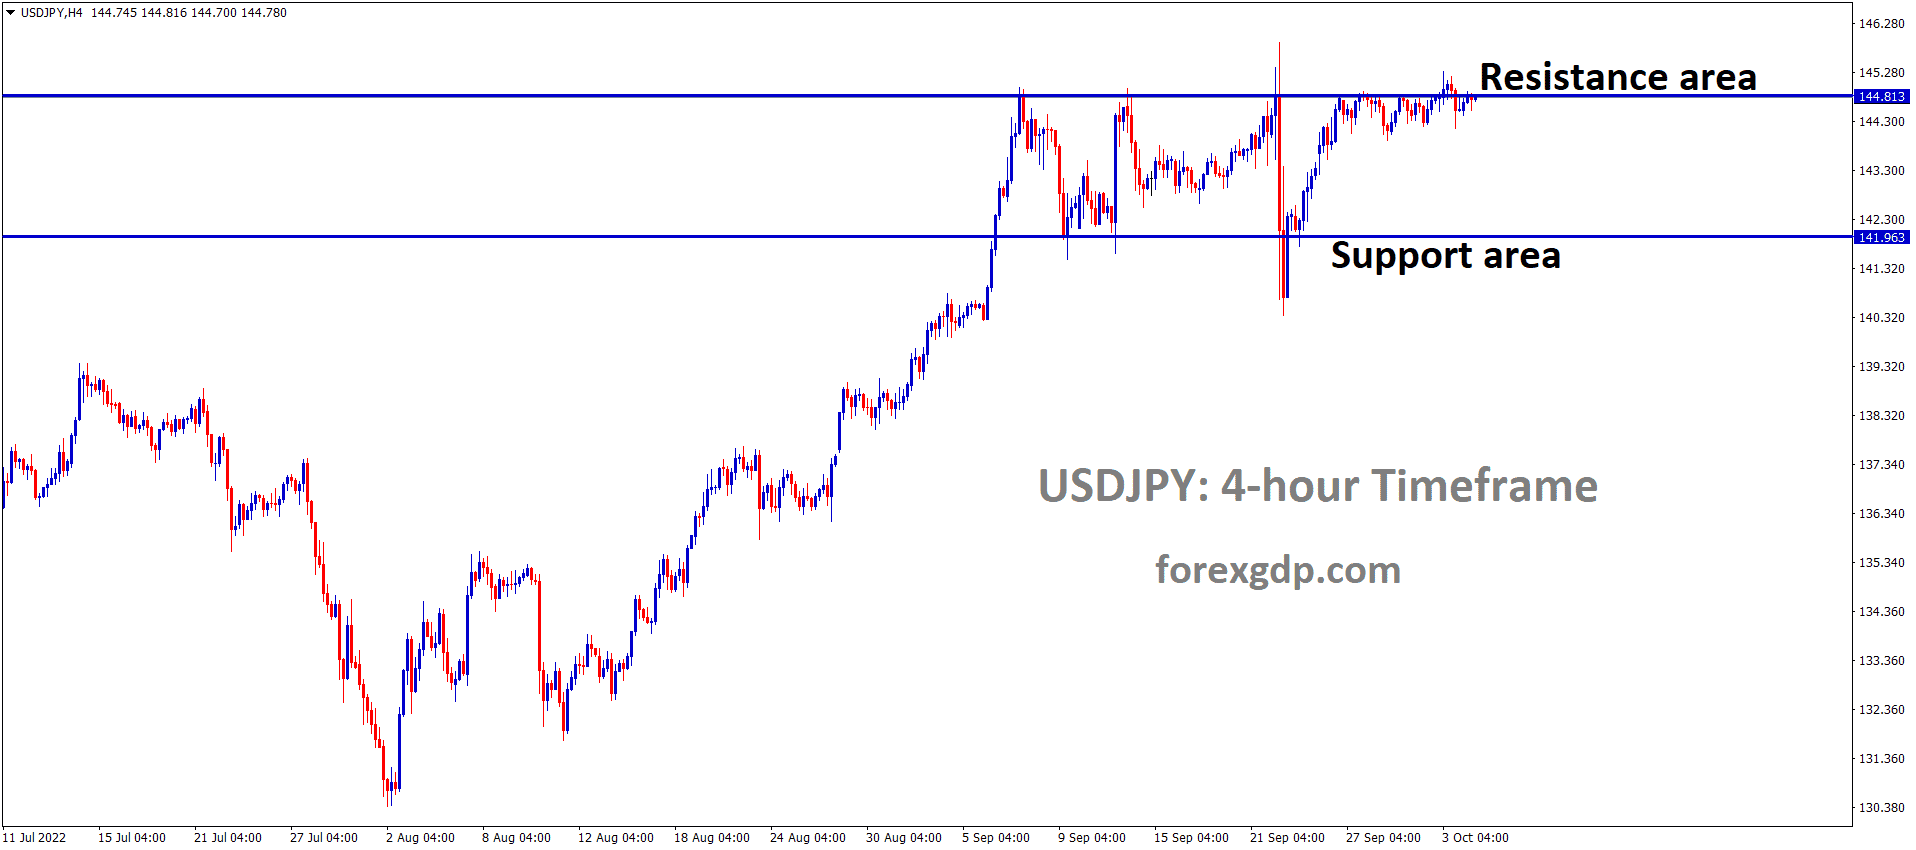 USDJPY is moving in the Box pattern and the market has reached the resistance area of the pattern 1